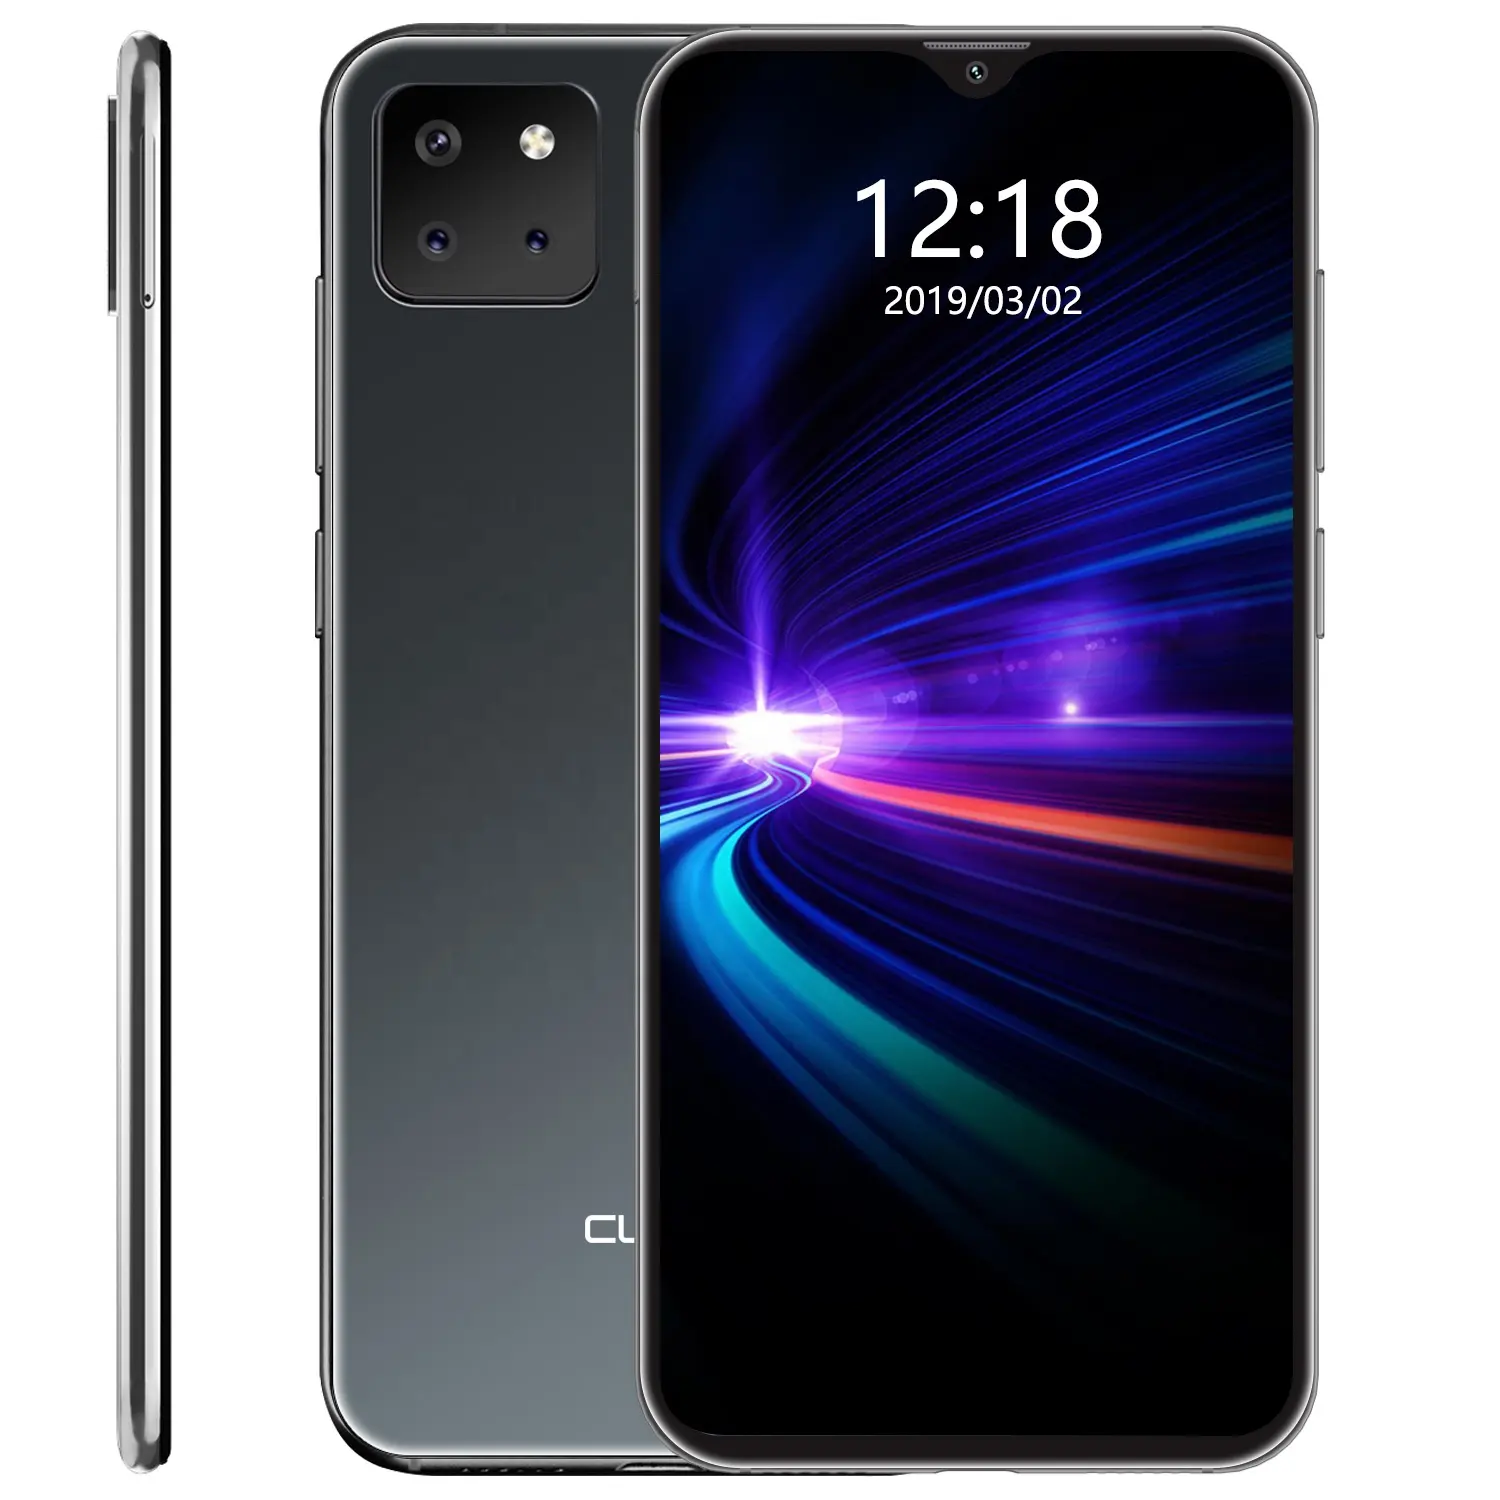 CUBOT X20 4GB+64 GB telephone AI Mode Triple Camera Smartphone 6.3 FHD+Waterdrop Screen Android 9.0 Face ID mobile phones